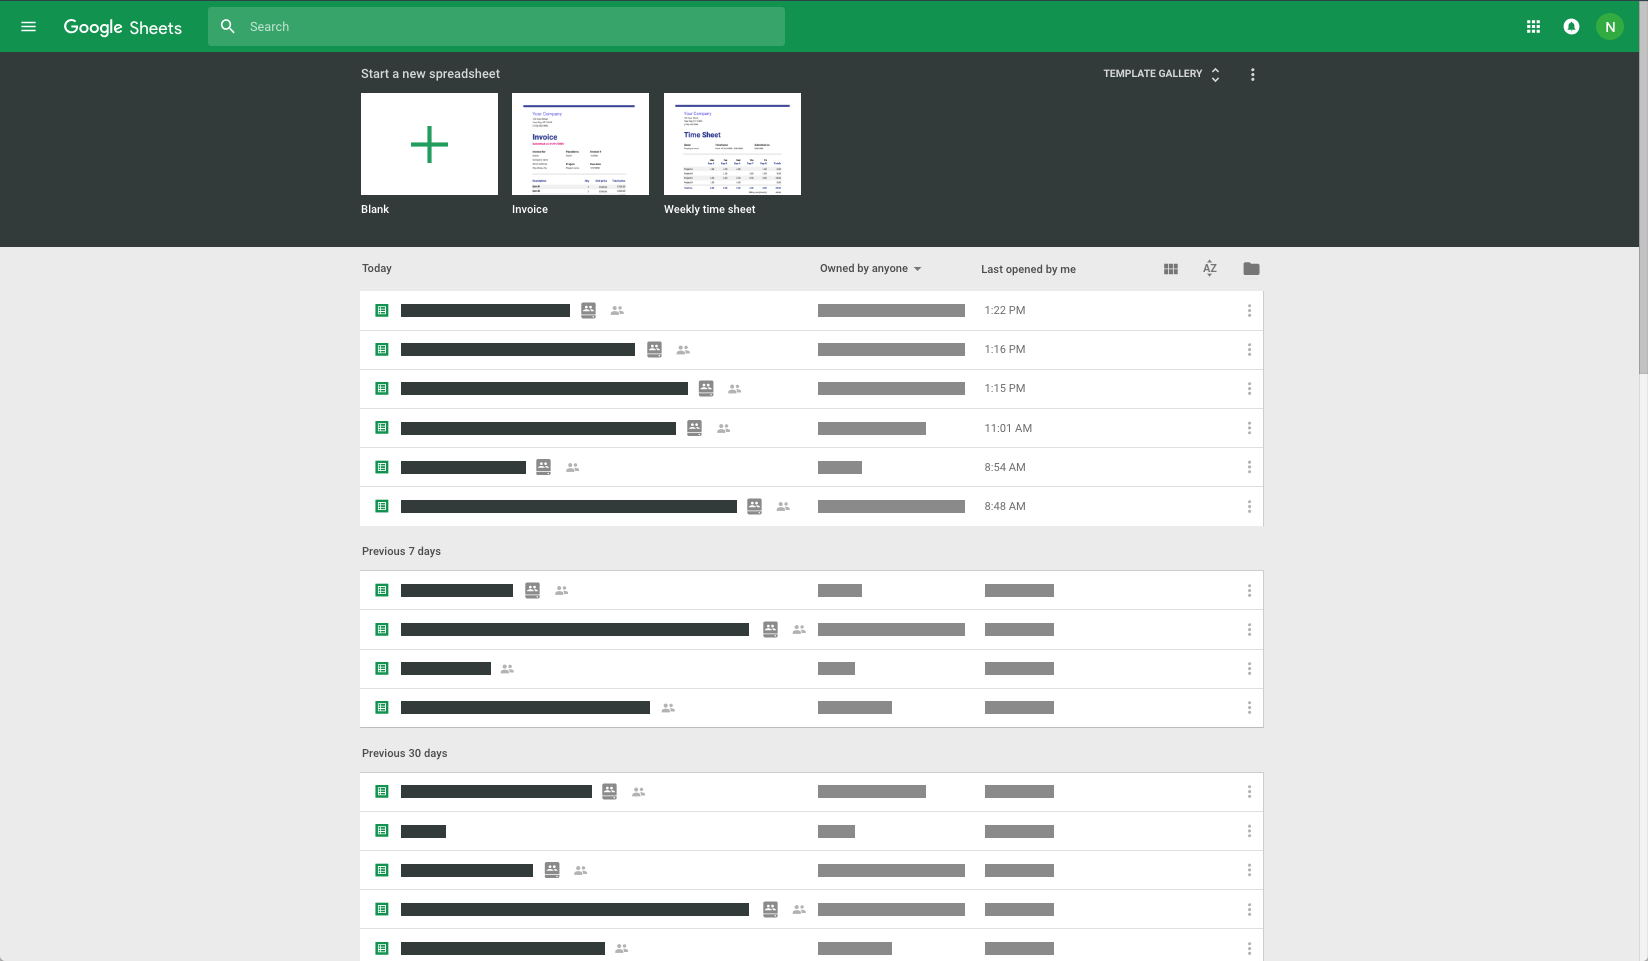 Screenshot of the Google Sheets home page.